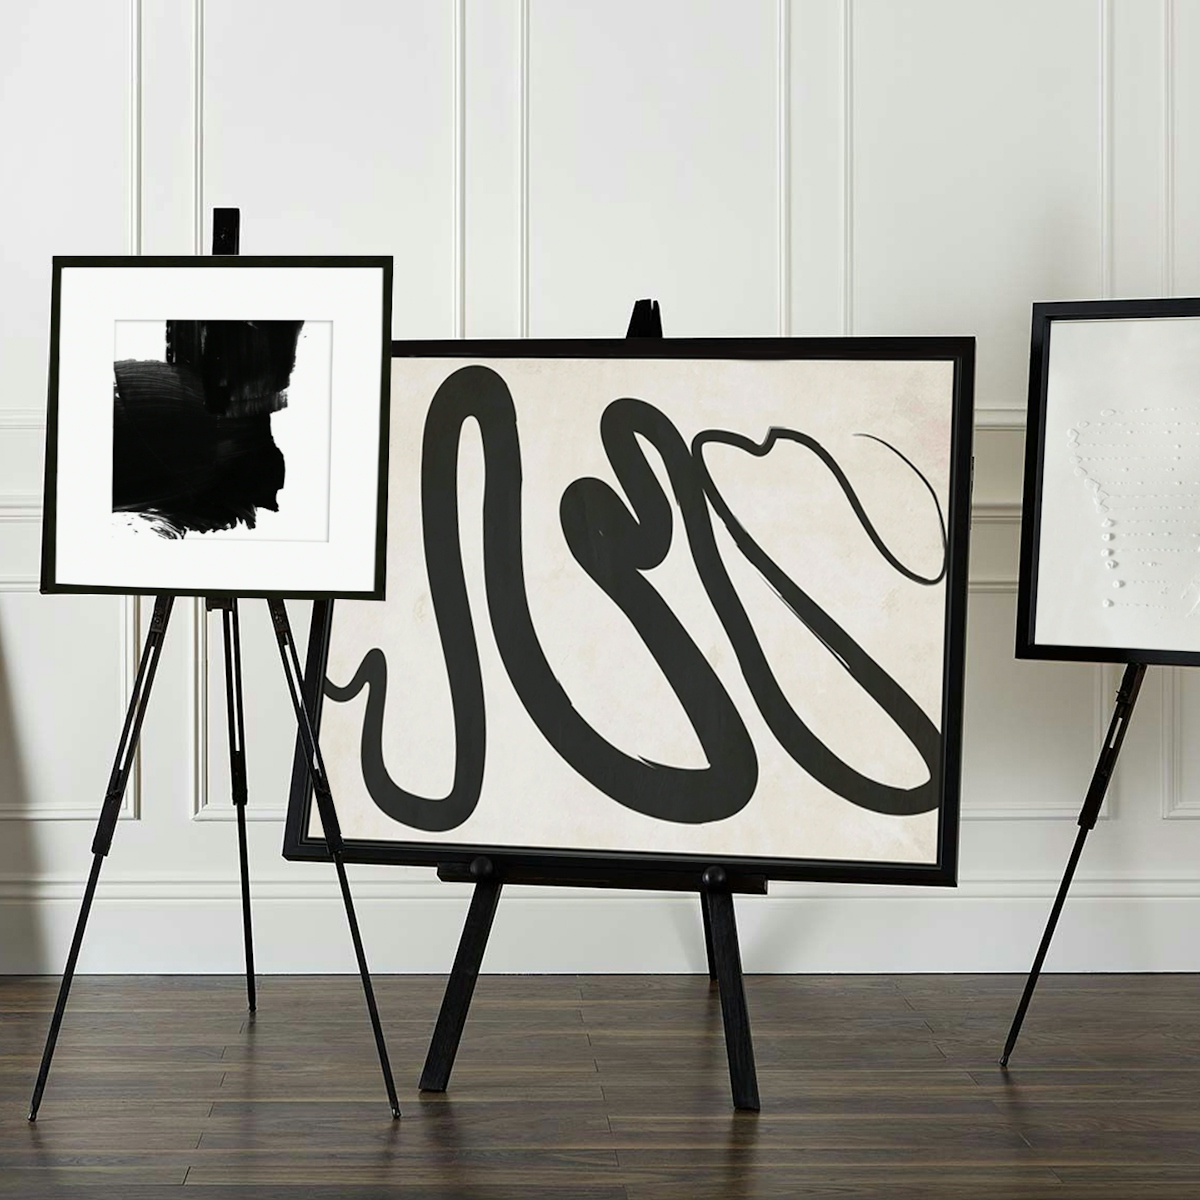 Abstract canvases on easels in monochrome colours